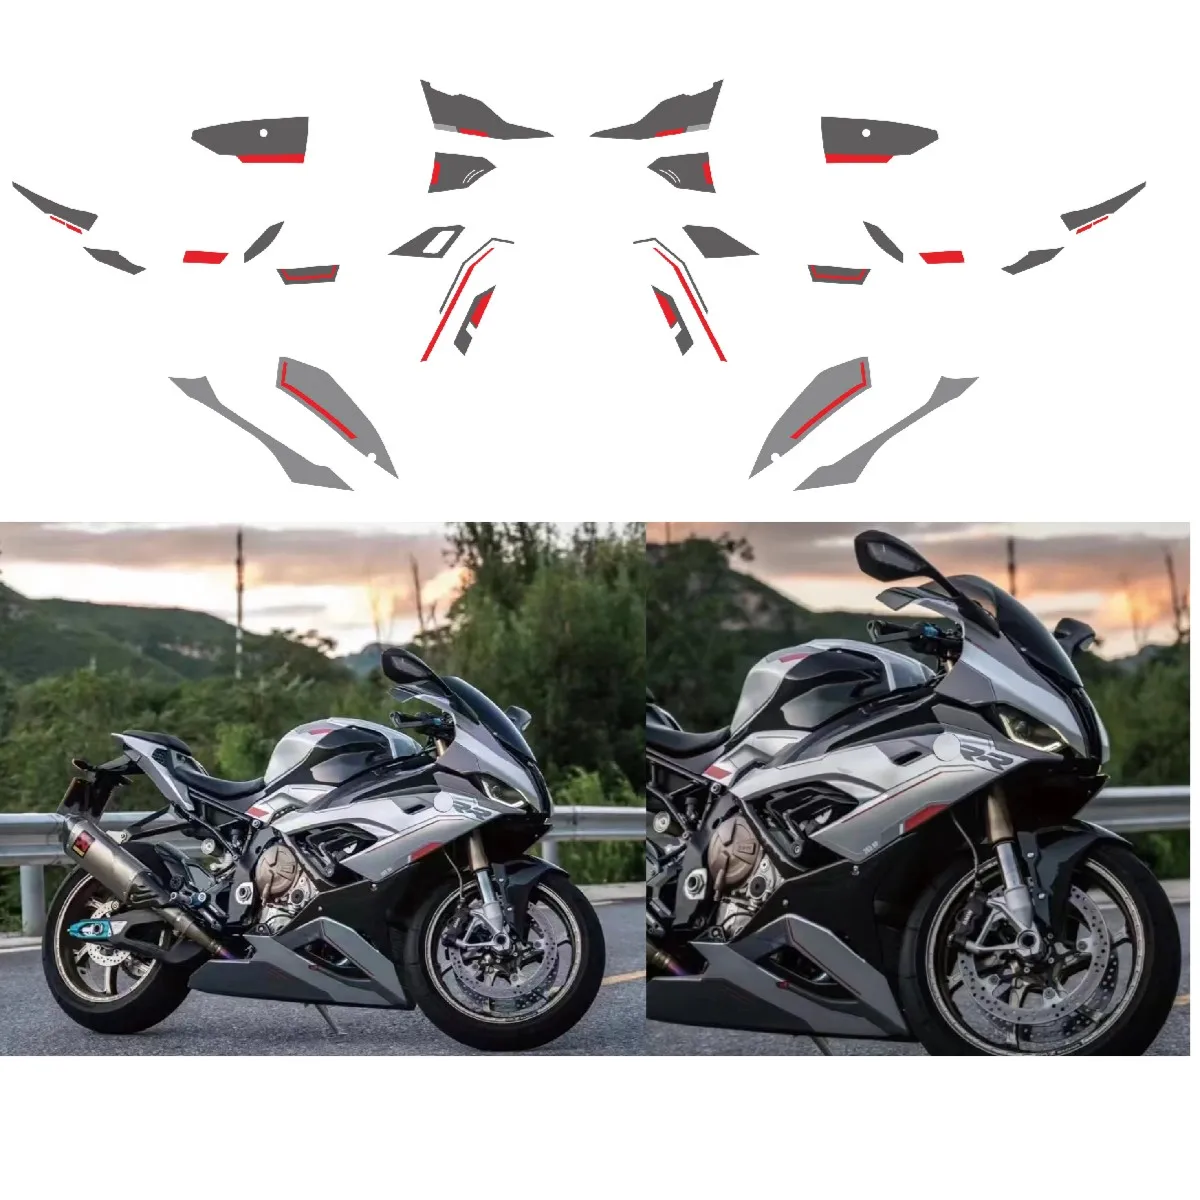 Motorcycle fairing sticker is suitable for M1000RR S1000RR 2019 2020 2021 2022 Auto Expo sticker protection brand logo sticker